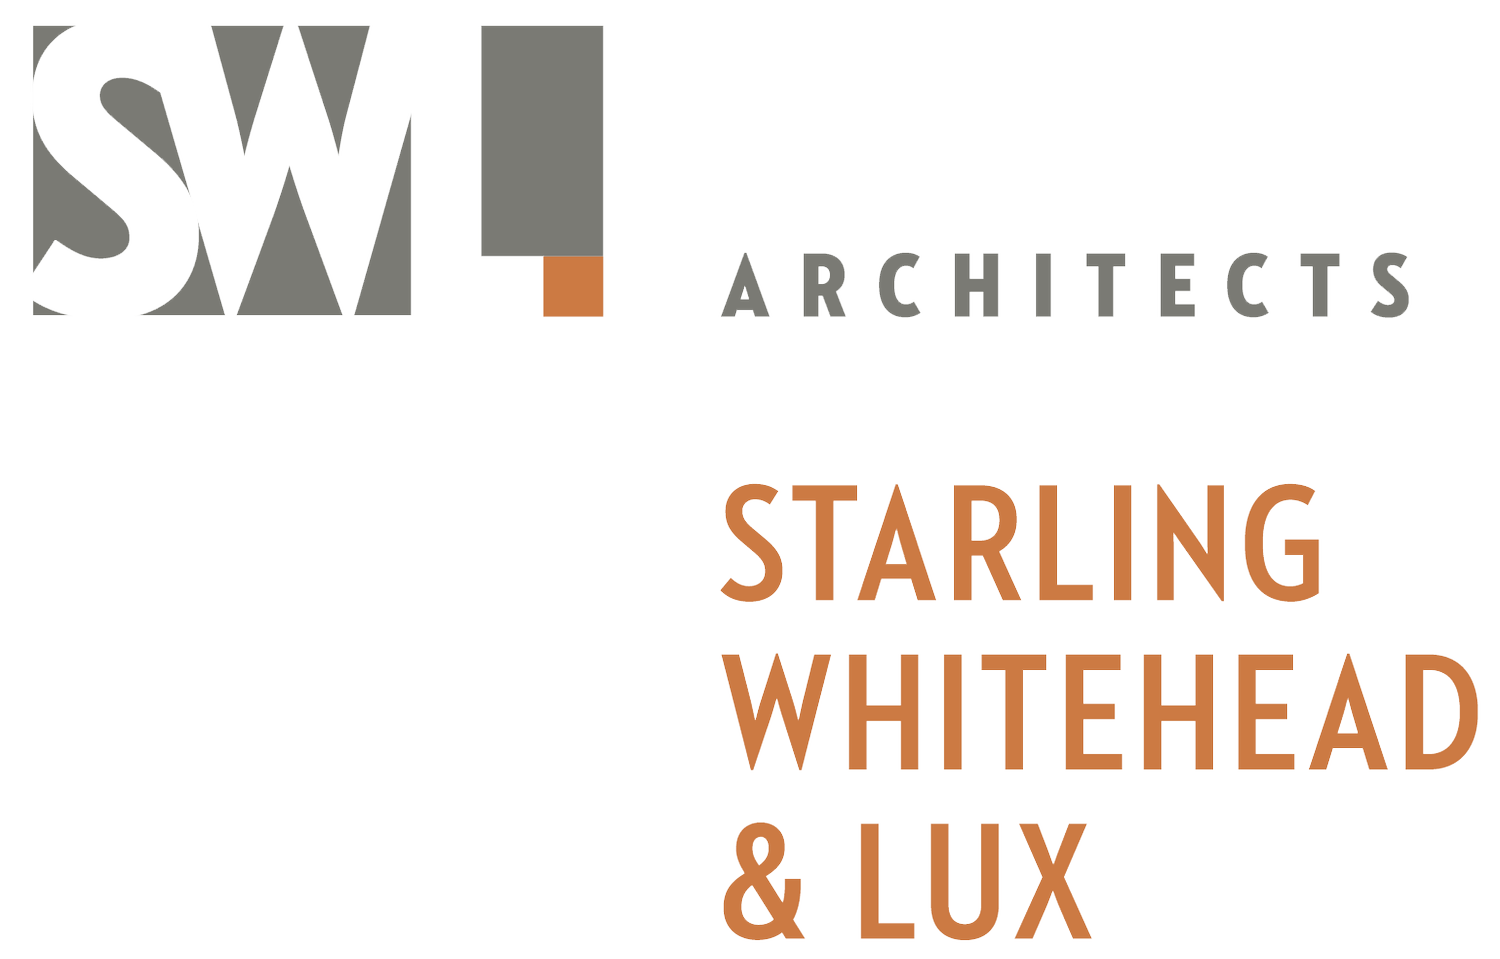 Starling Whitehead & Lux Architects